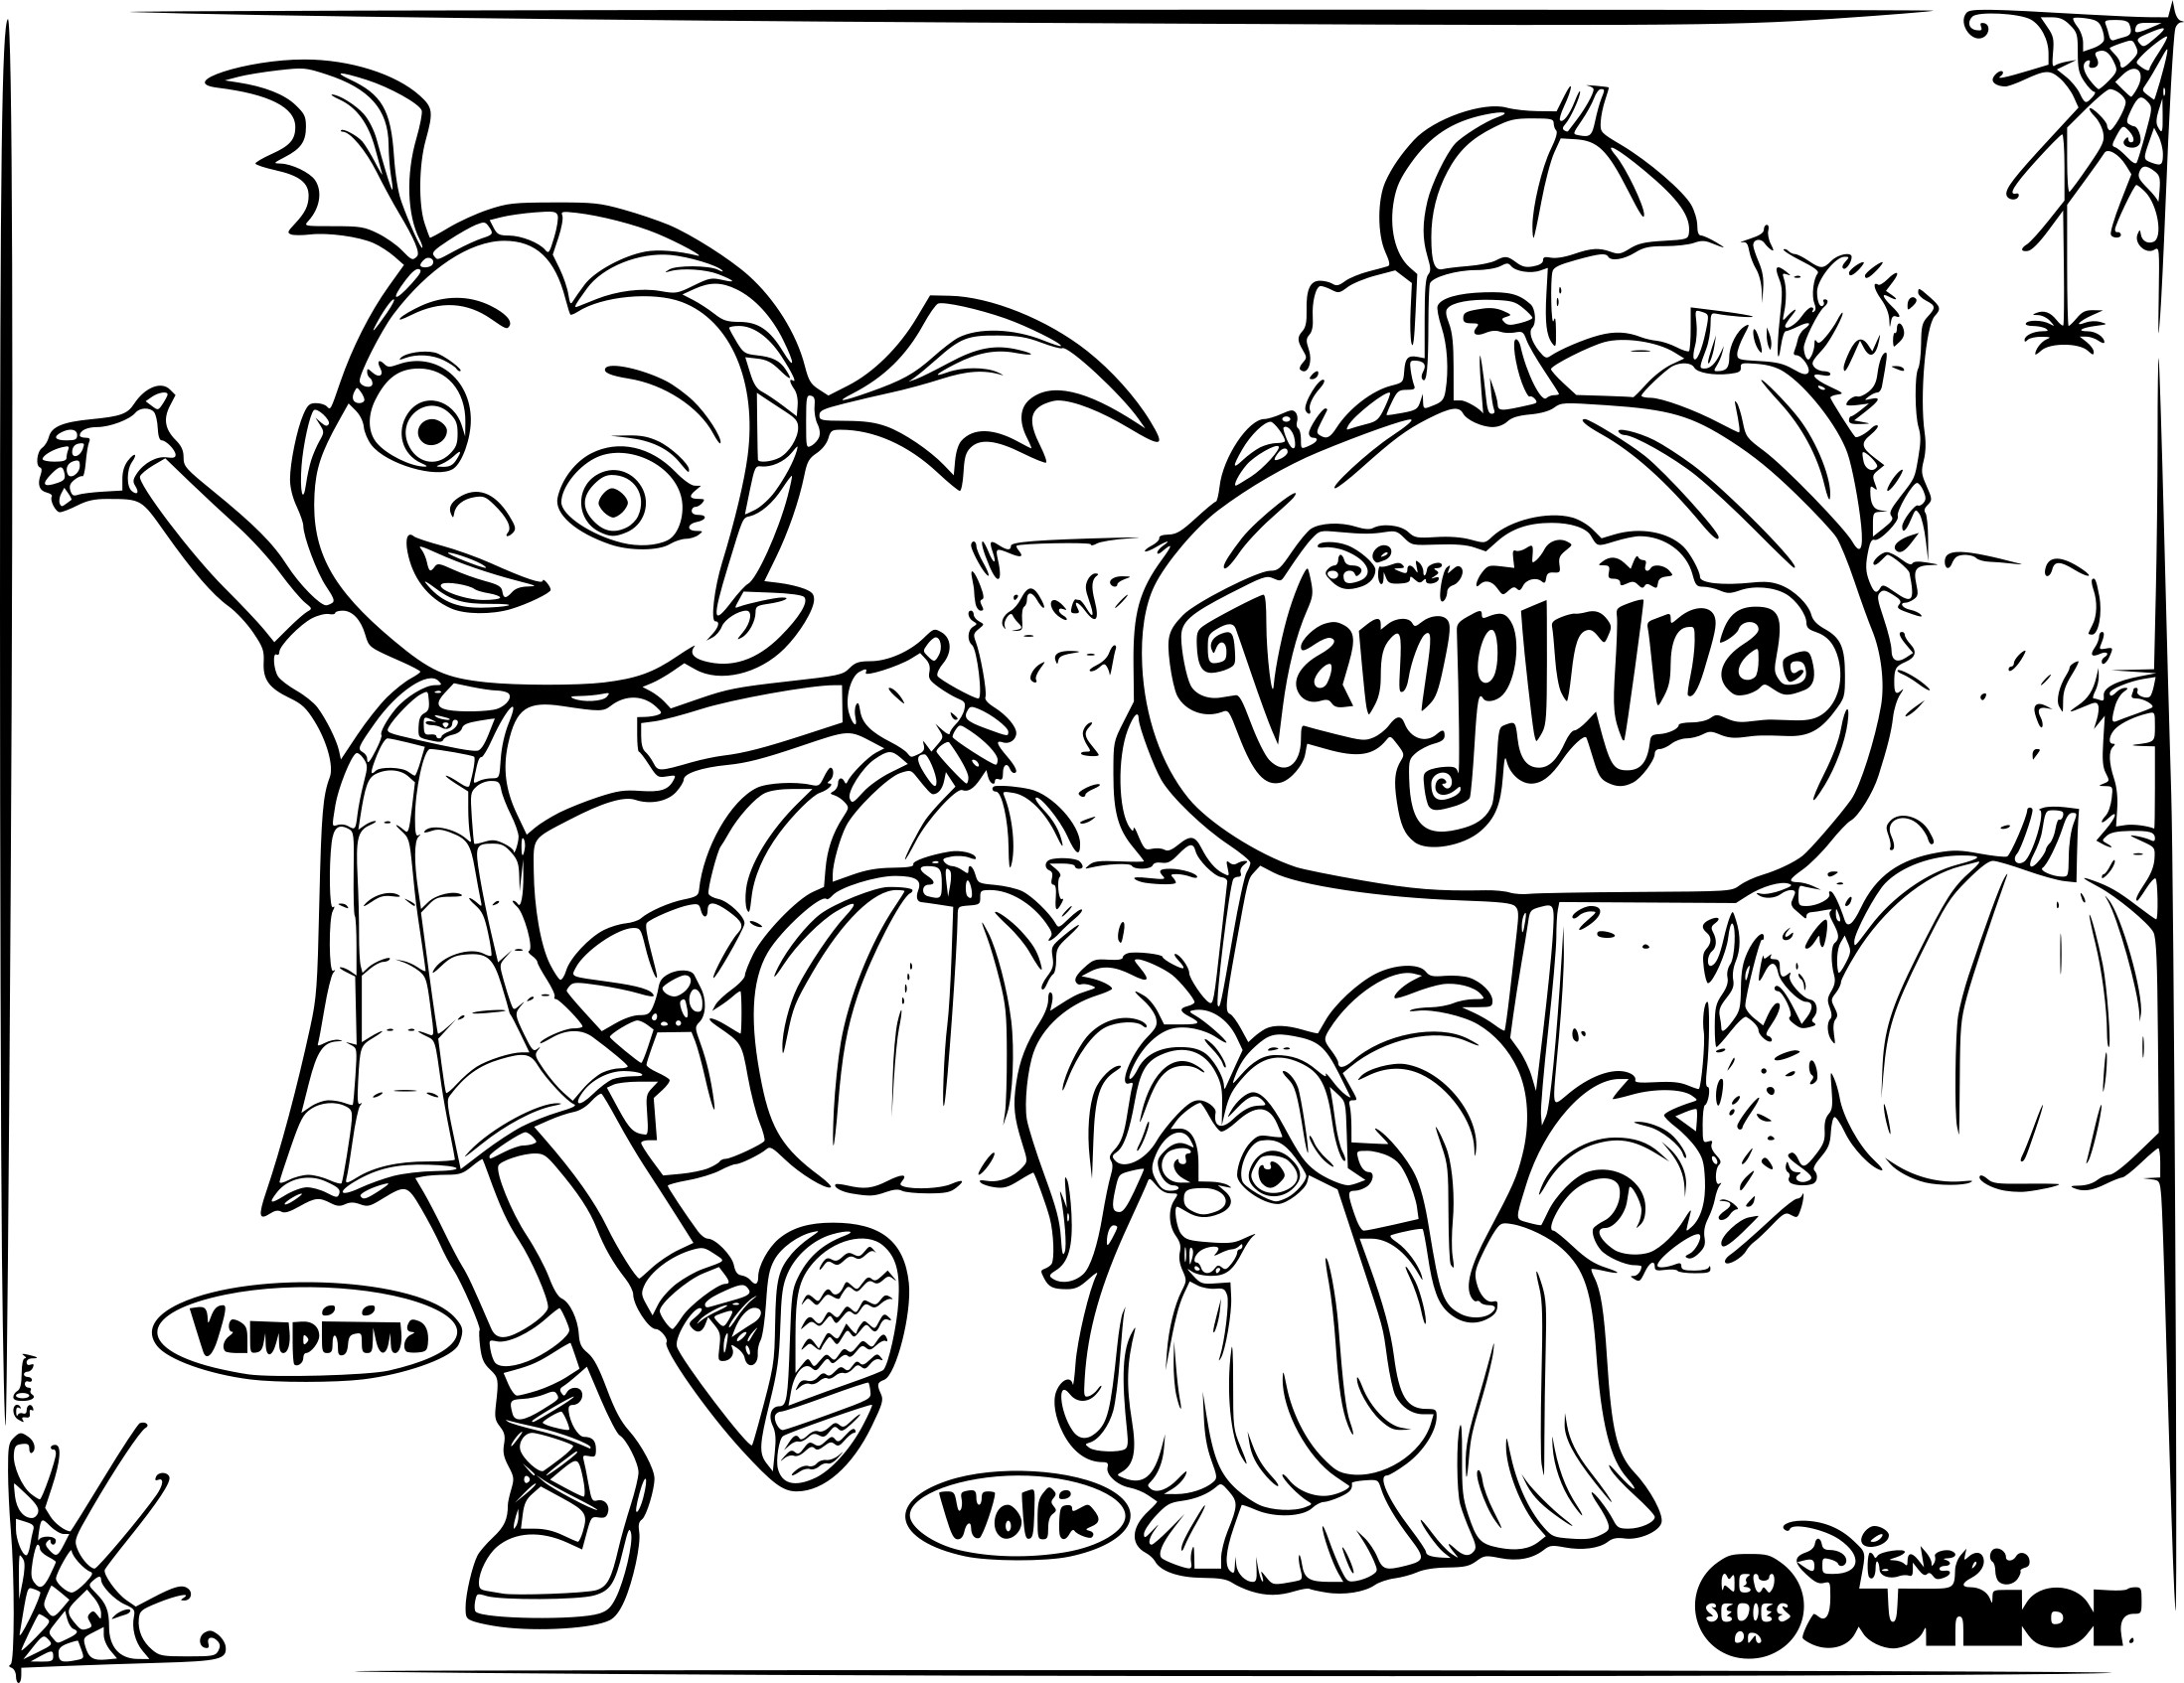 Vampirina coloring page   free printable coloring pages on coloori.com